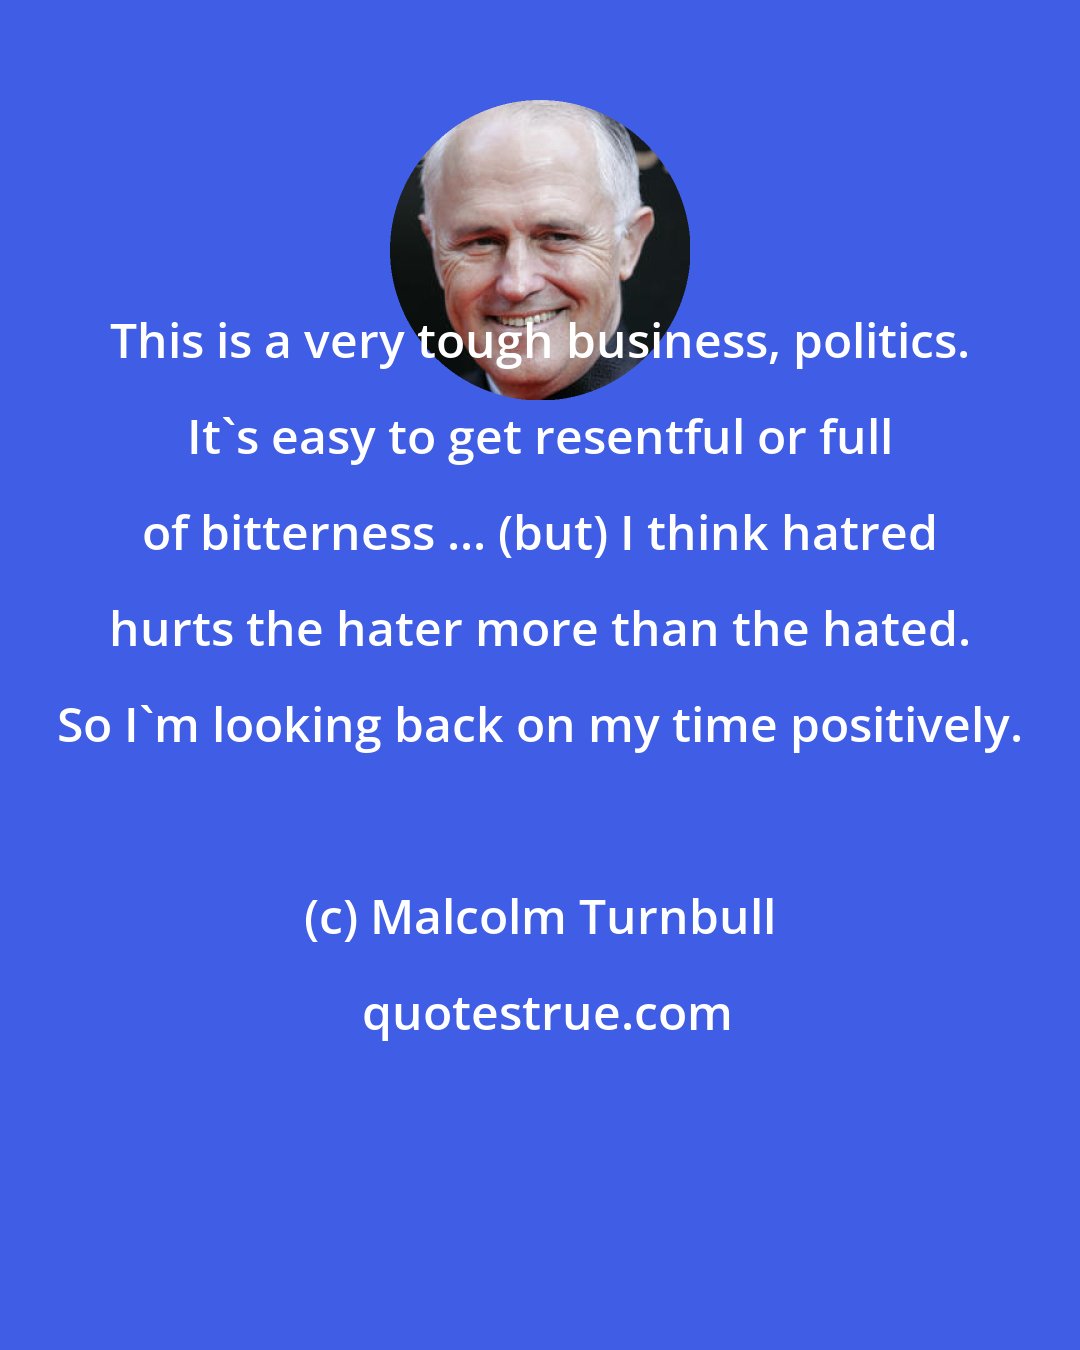 Malcolm Turnbull: This is a very tough business, politics. It's easy to get resentful or full of bitterness ... (but) I think hatred hurts the hater more than the hated. So I'm looking back on my time positively.